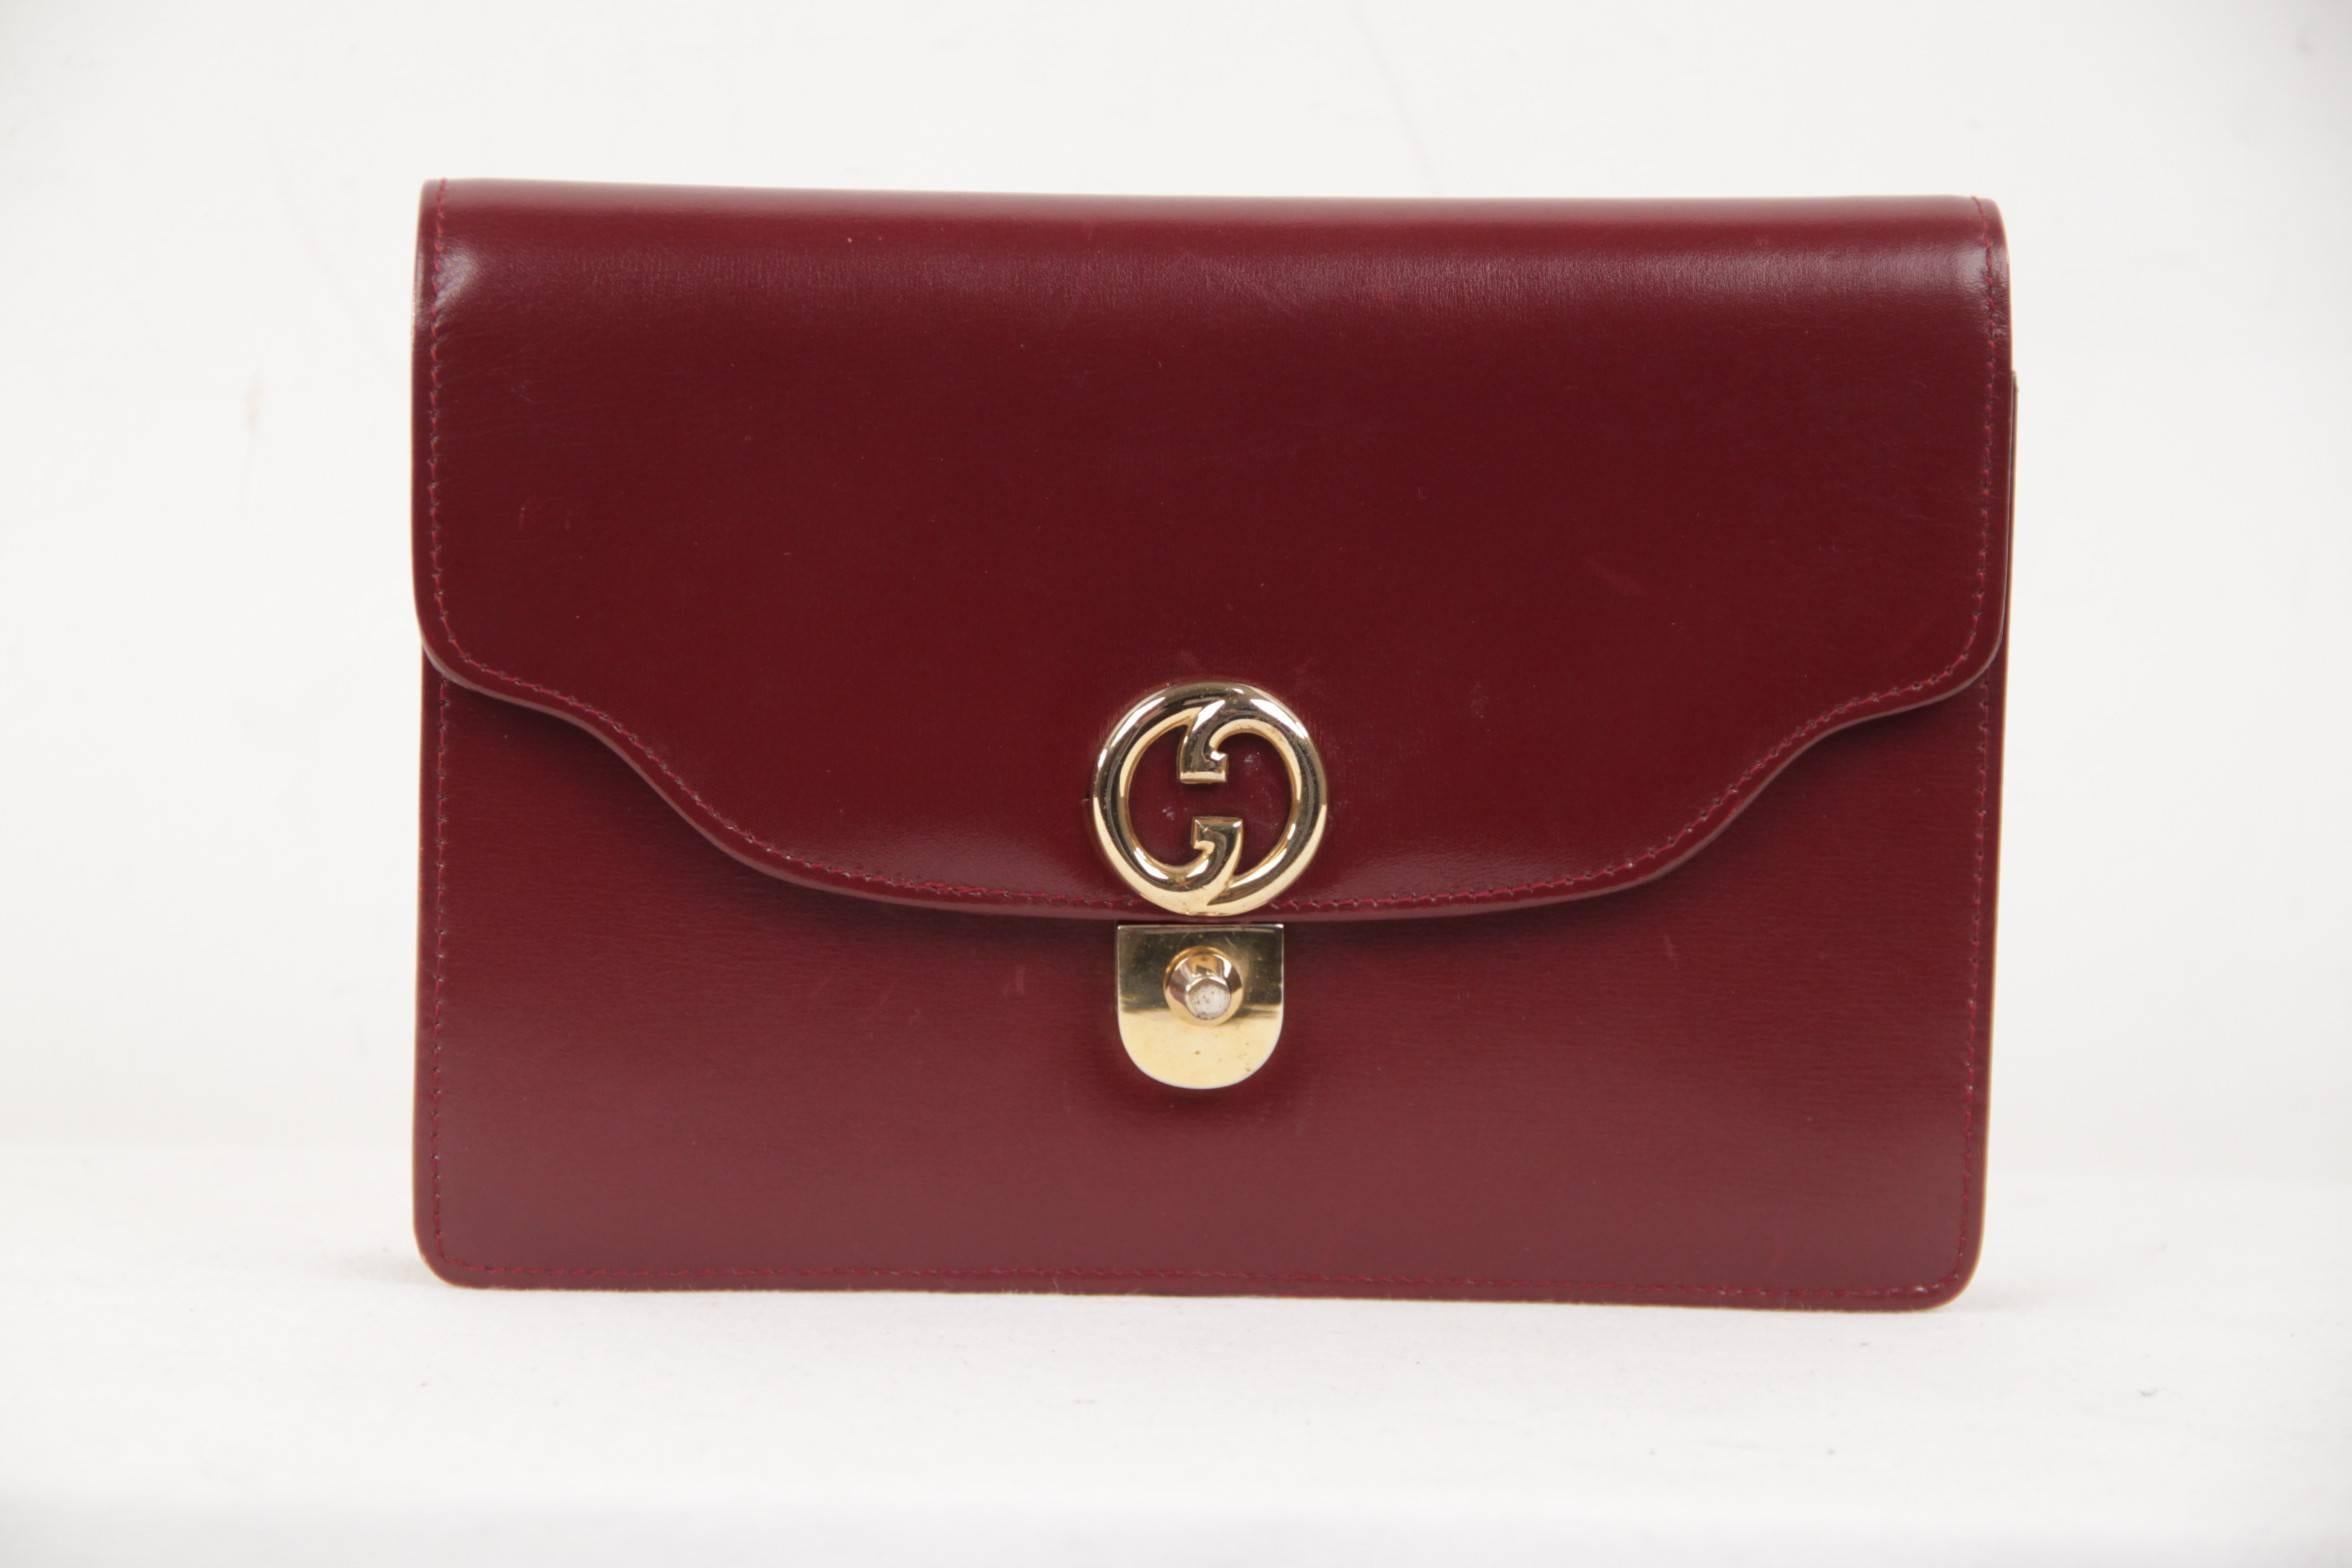 Brand: GUCCI - Made in Italy

Logos / Tags: 'Made in Italy by GUCCI' embossed inside, gold metal GG - GUCCI logo on the front

Condition rate & details (please read our condition chart below): GENTLY USED~ Previously used, but no signs of